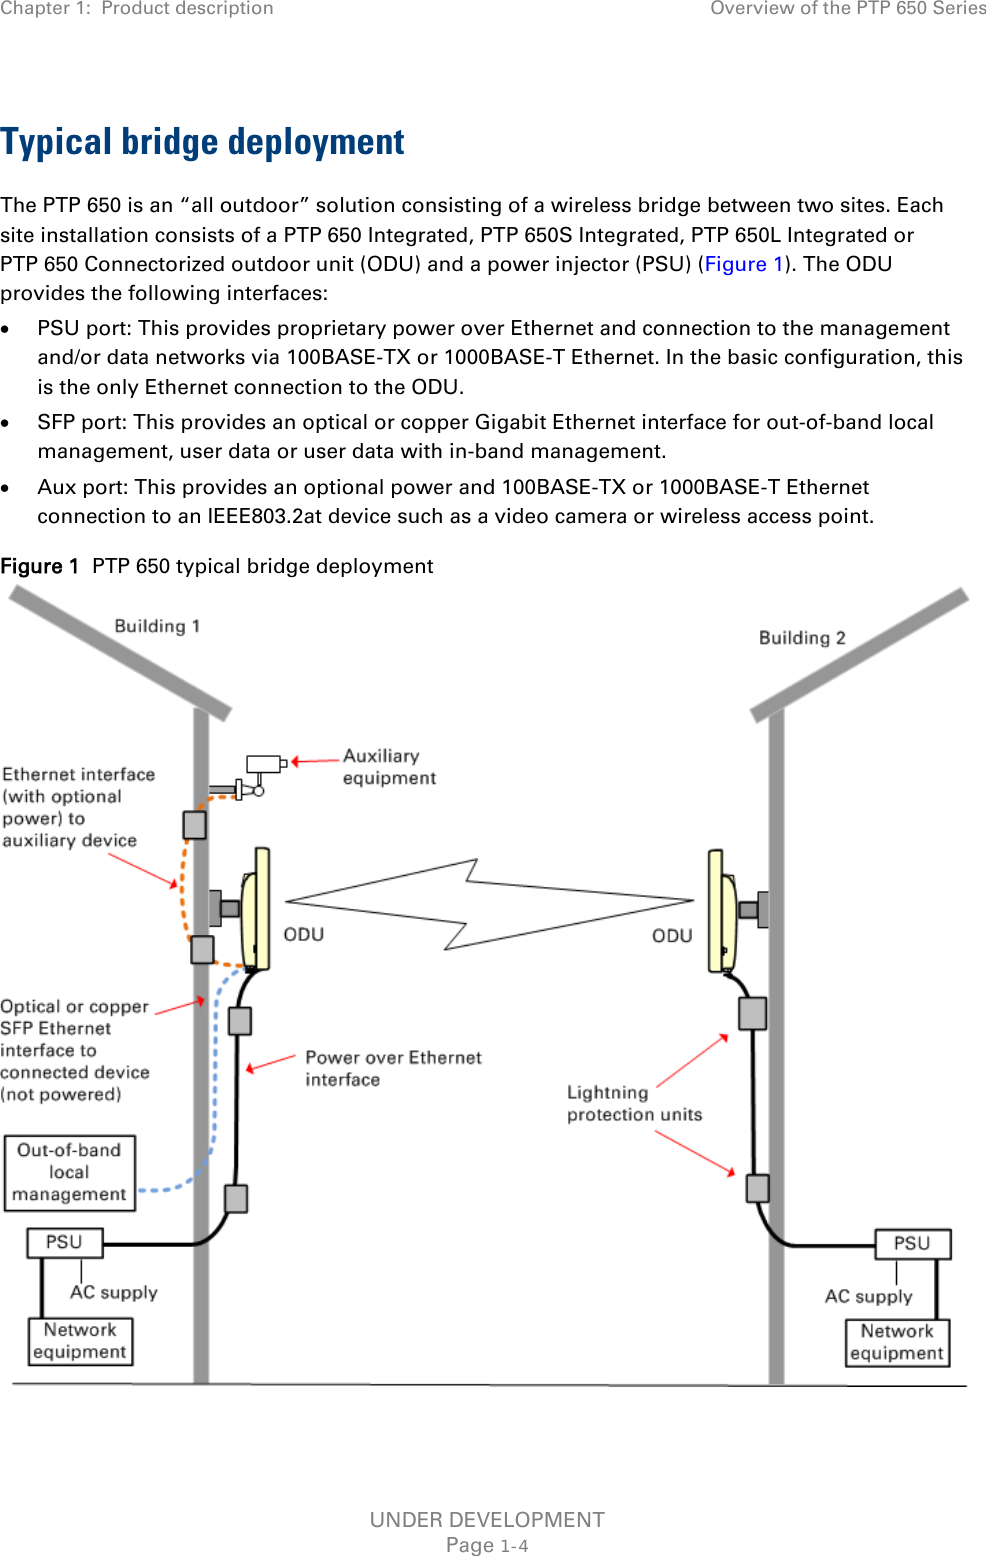 Chapter 1:  Product description Overview of the PTP 650 Series  Typical bridge deployment The PTP 650 is an “all outdoor” solution consisting of a wireless bridge between two sites. Each site installation consists of a PTP 650 Integrated, PTP 650S Integrated, PTP 650L Integrated or PTP 650 Connectorized outdoor unit (ODU) and a power injector (PSU) (Figure 1). The ODU provides the following interfaces: • PSU port: This provides proprietary power over Ethernet and connection to the management and/or data networks via 100BASE-TX or 1000BASE-T Ethernet. In the basic configuration, this is the only Ethernet connection to the ODU. • SFP port: This provides an optical or copper Gigabit Ethernet interface for out-of-band local management, user data or user data with in-band management. • Aux port: This provides an optional power and 100BASE-TX or 1000BASE-T Ethernet connection to an IEEE803.2at device such as a video camera or wireless access point. Figure 1  PTP 650 typical bridge deployment   UNDER DEVELOPMENT Page 1-4 